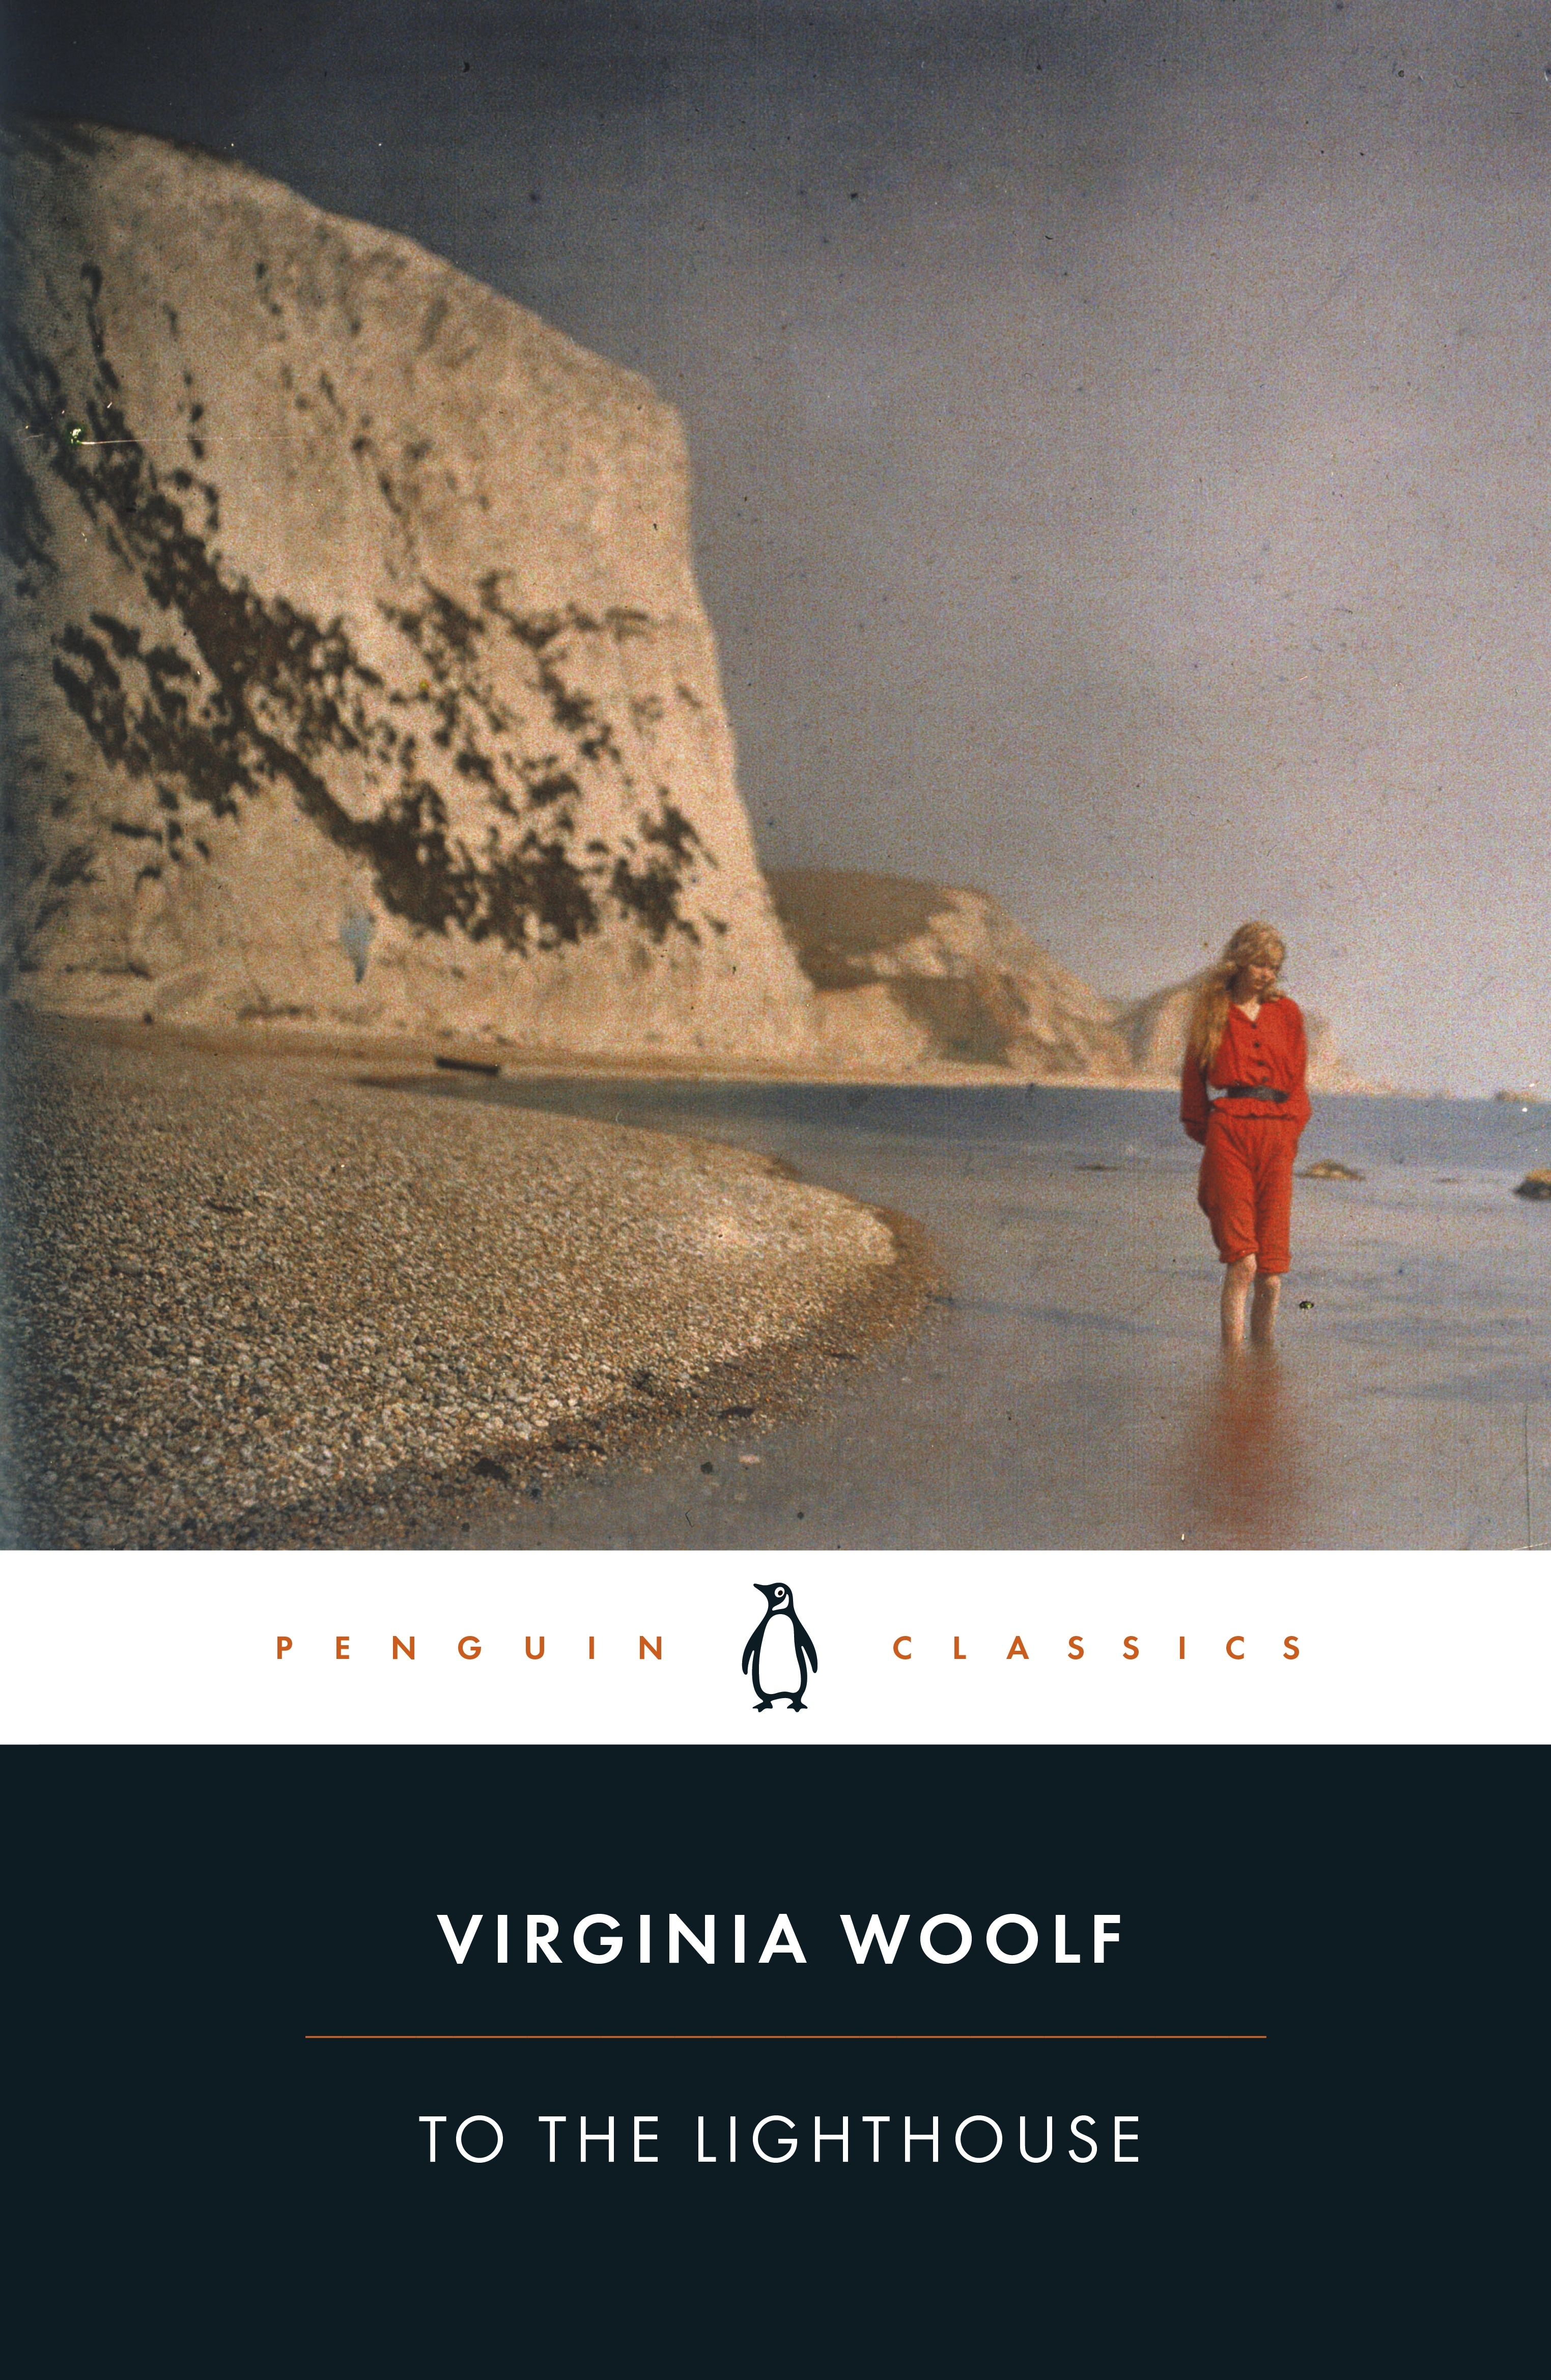 Book “To the Lighthouse” by Virginia Woolf — April 4, 2019